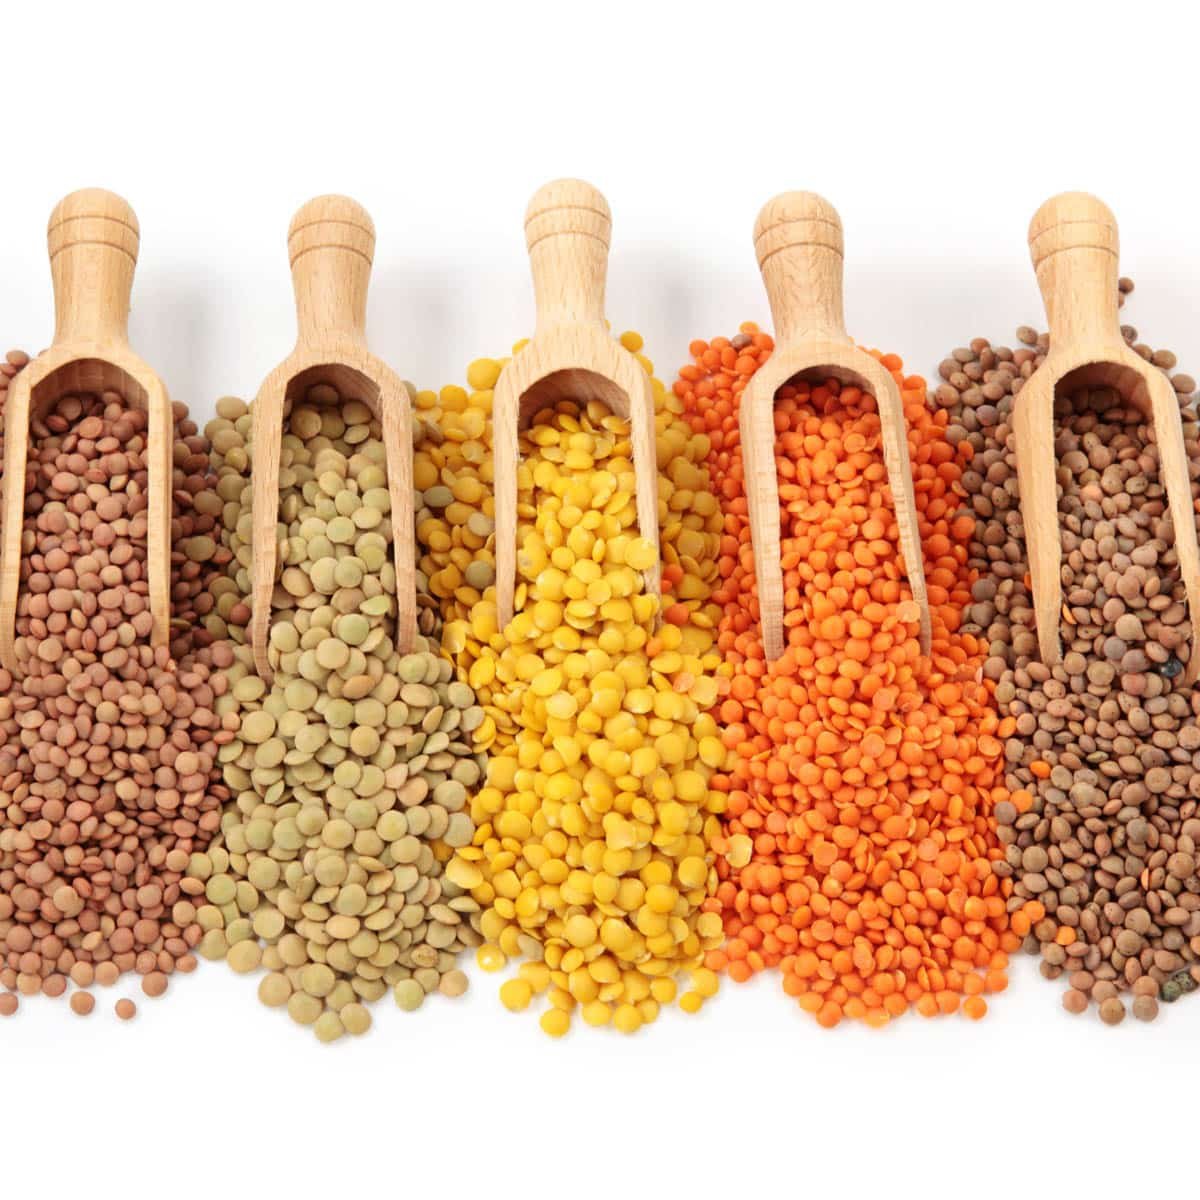 Indian Cooking 101: Different Types of Indian Dals (Legumes, Lentils,  Beans, Pulses)